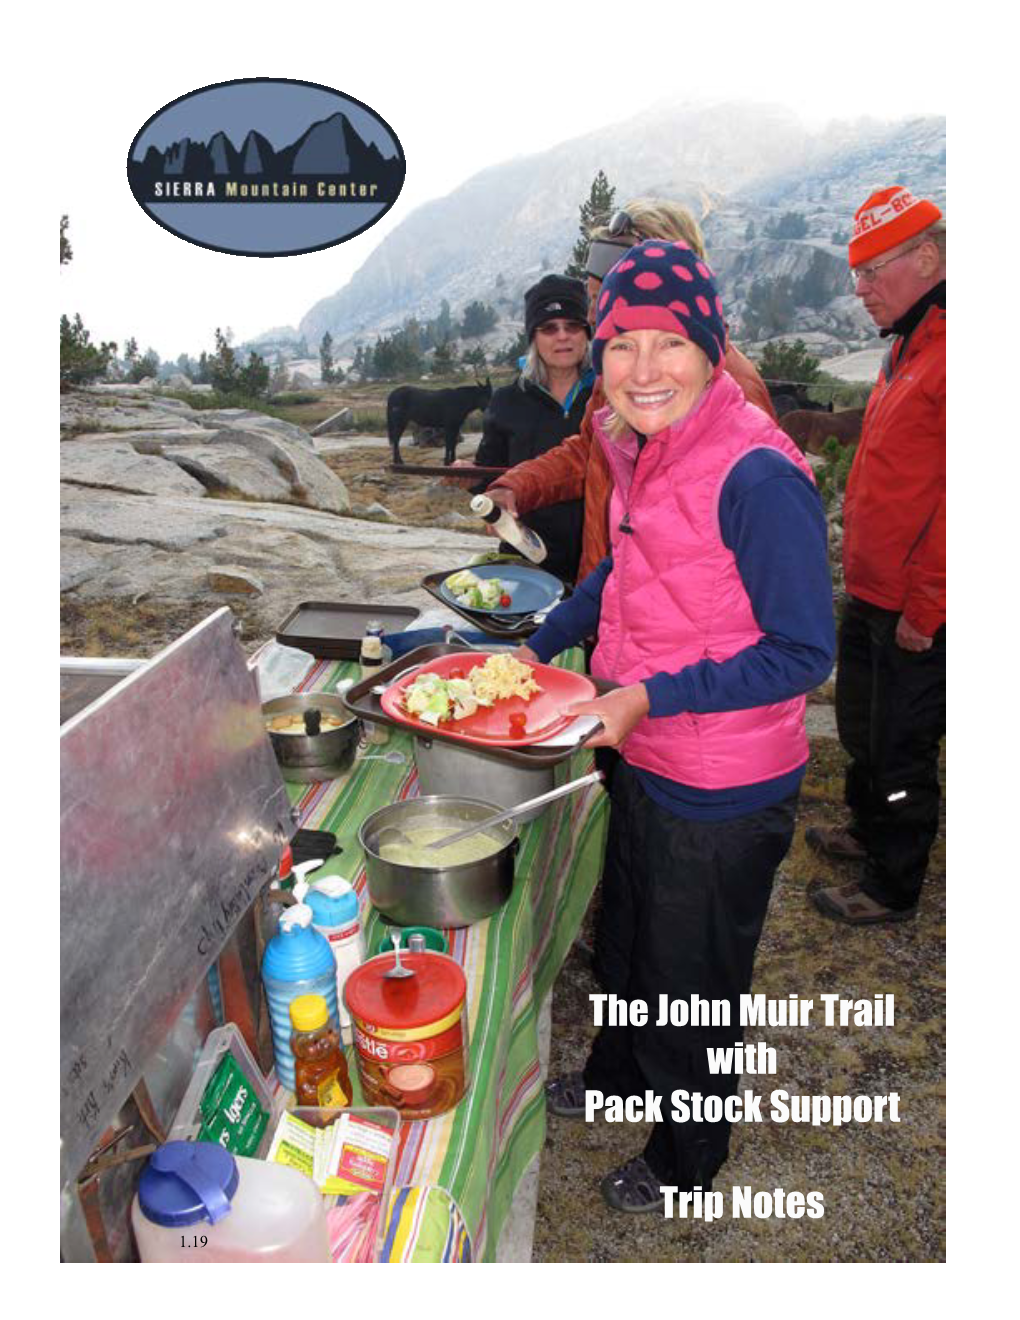 The John Muir Trail with Pack Stock Support